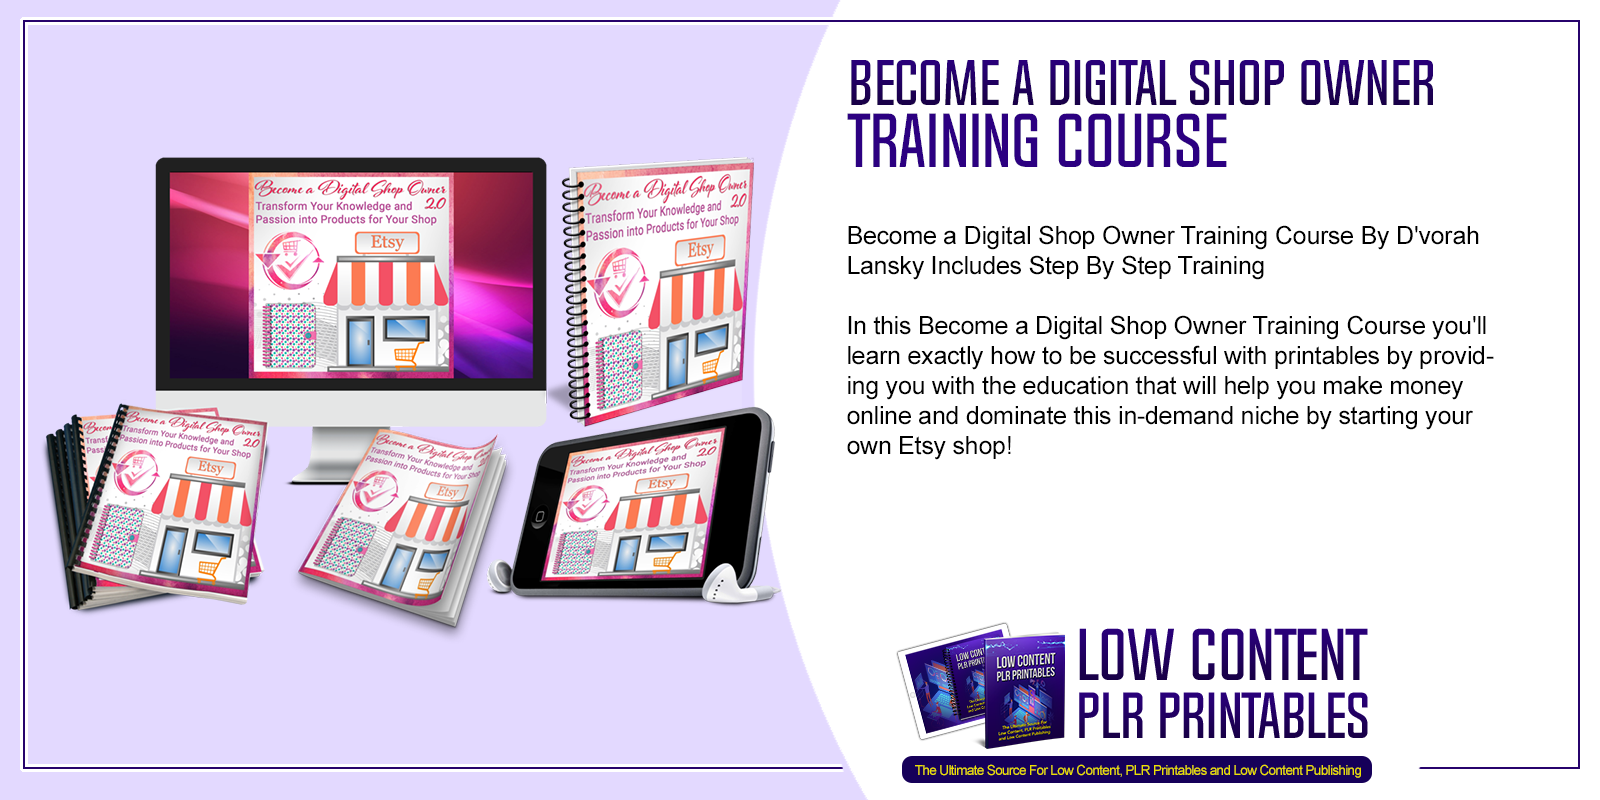 Become a Digital Shop Owner Training Course 2